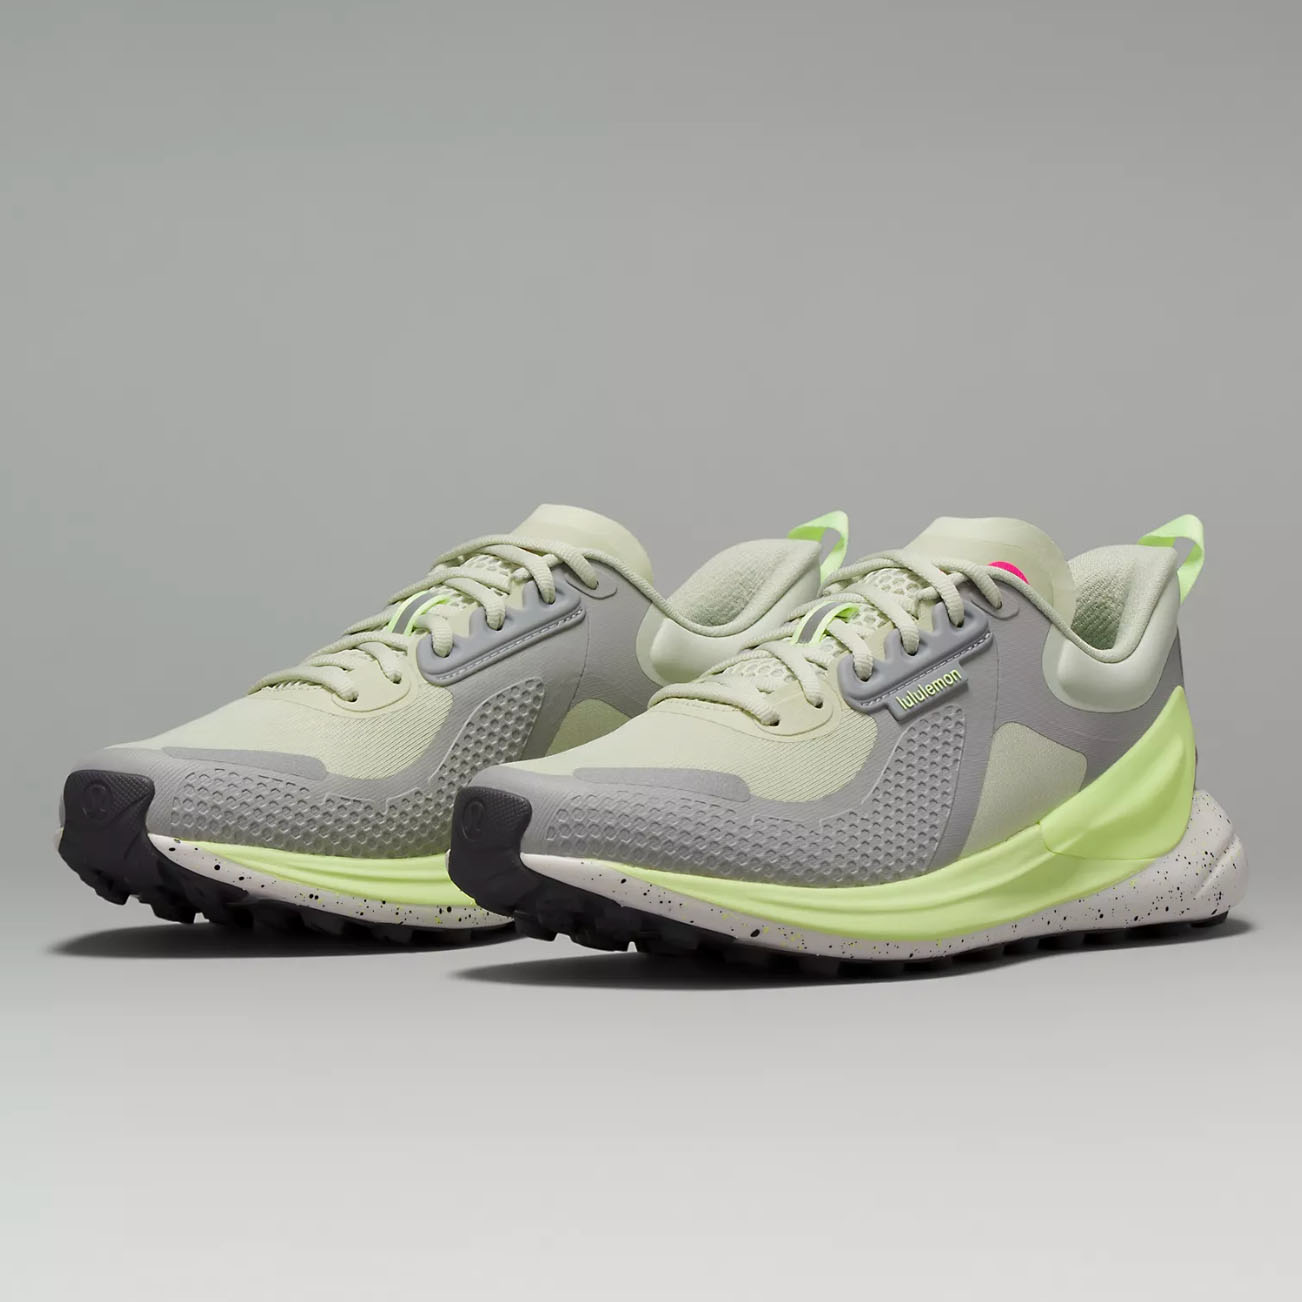 Grey and neon yellow hiking shoes